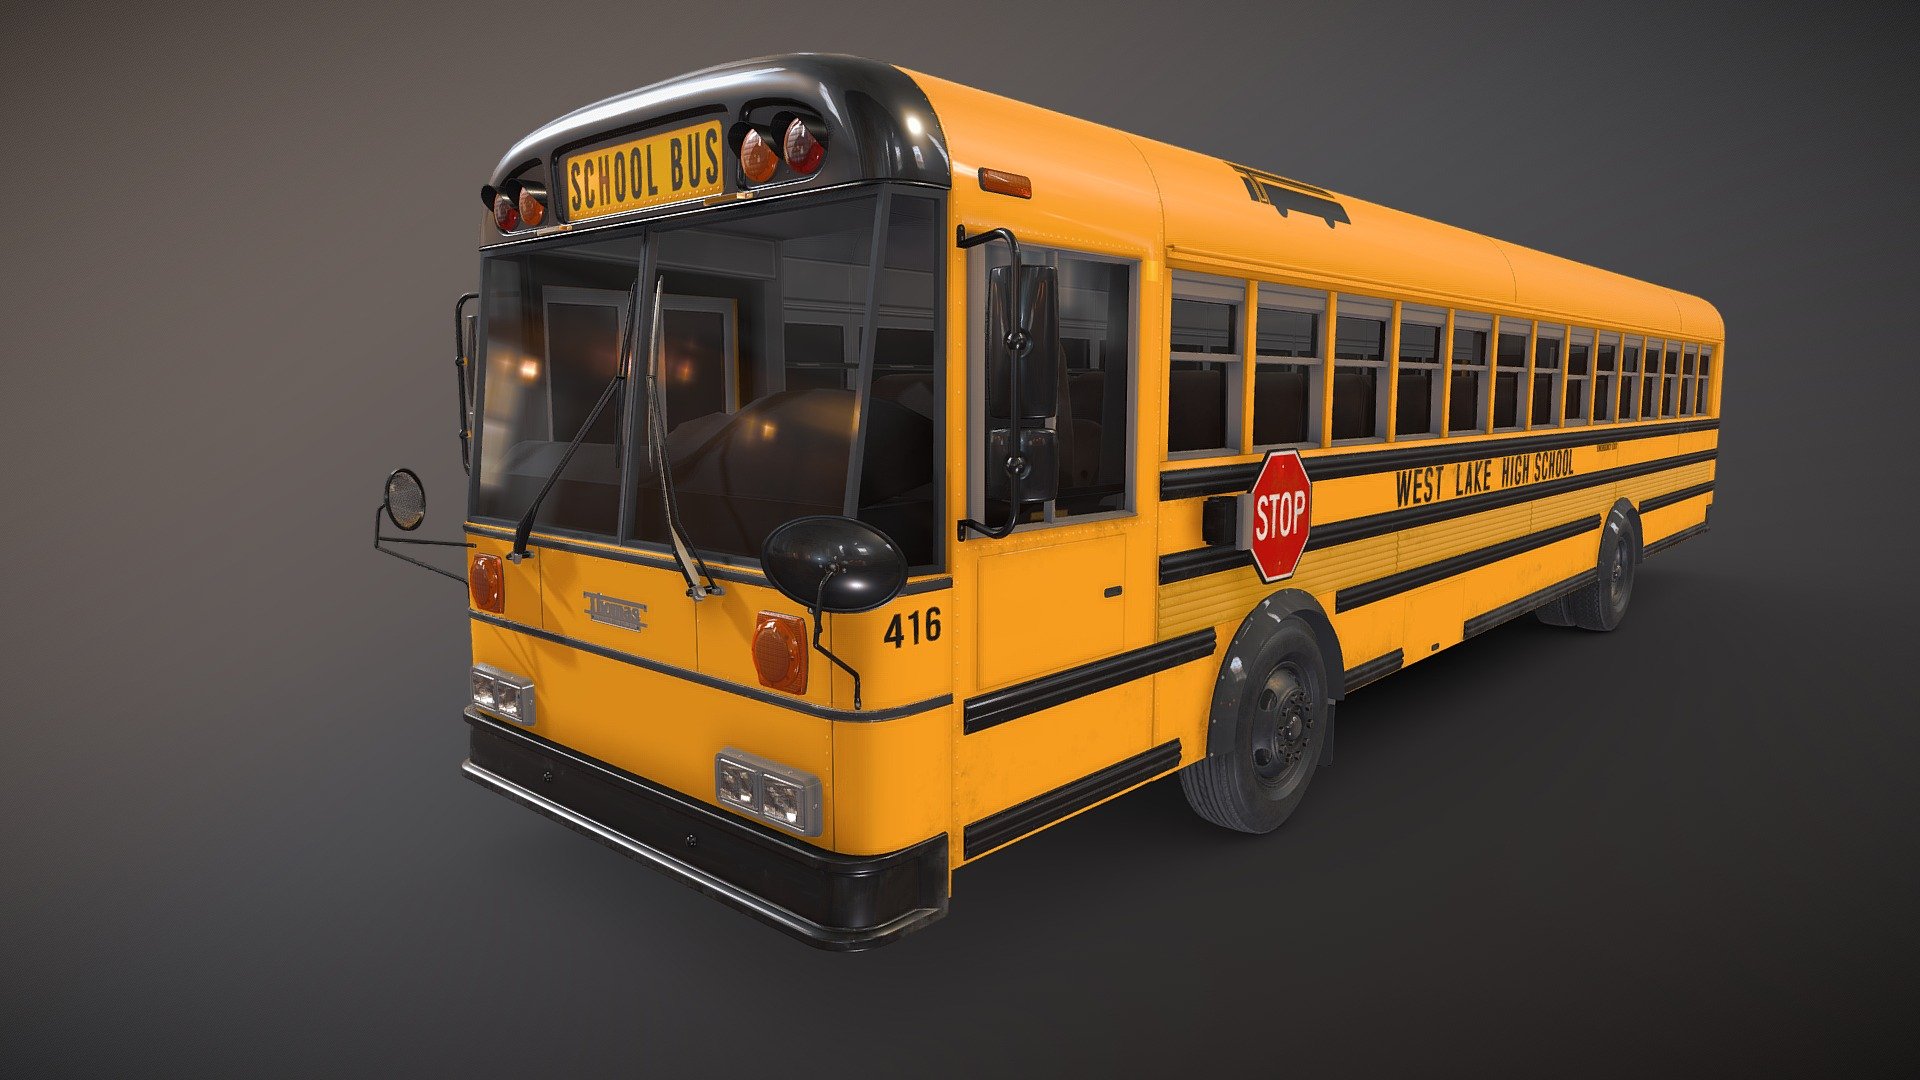 School bus Thomas Build 1994 game ready model.

Full textured model with clean topology.

High accuracy exterior model

Different tires for rear and front wheels.

High detailed body - seams, rivets, chrome parts, wipers and etc.

Side and back doors are openable.

Lowpoly interior - 6711 tris 4737 verts

Wheels - 13478 tris 7834 verts

Full model - 63471 tris 37604 verts

High detailed rims and tires, with PBR maps(Base_Color/Metallic/Normal/Roughness.png2048x2048 )

Original scale. Lenght 11.6m , width 2.35m , height 2.8m.

Model ready for real-time apps, games, virtual reality and augmented reality 3d model